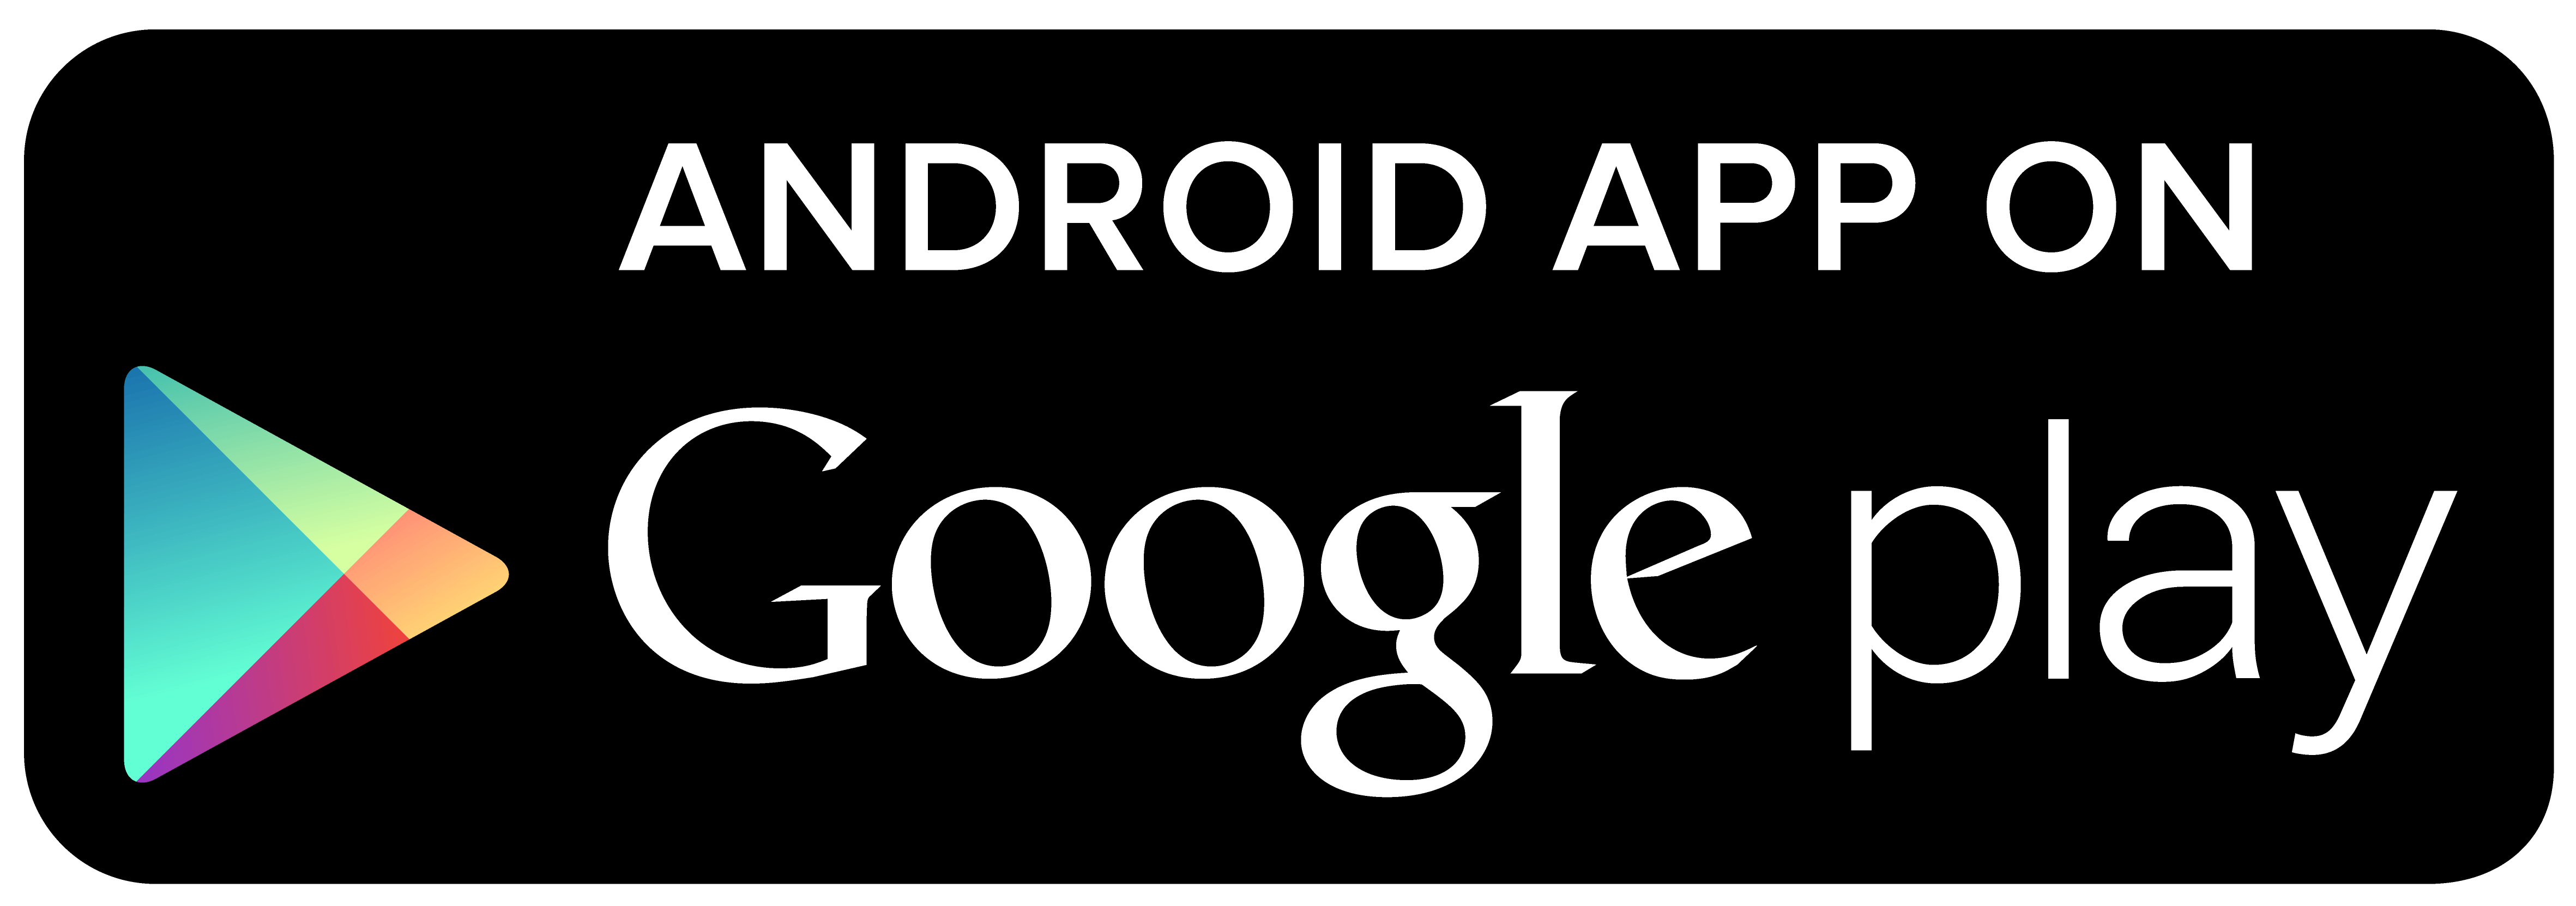 Google App Store Logo - Play Store Logo Png (93+ images in Collection) Page 1